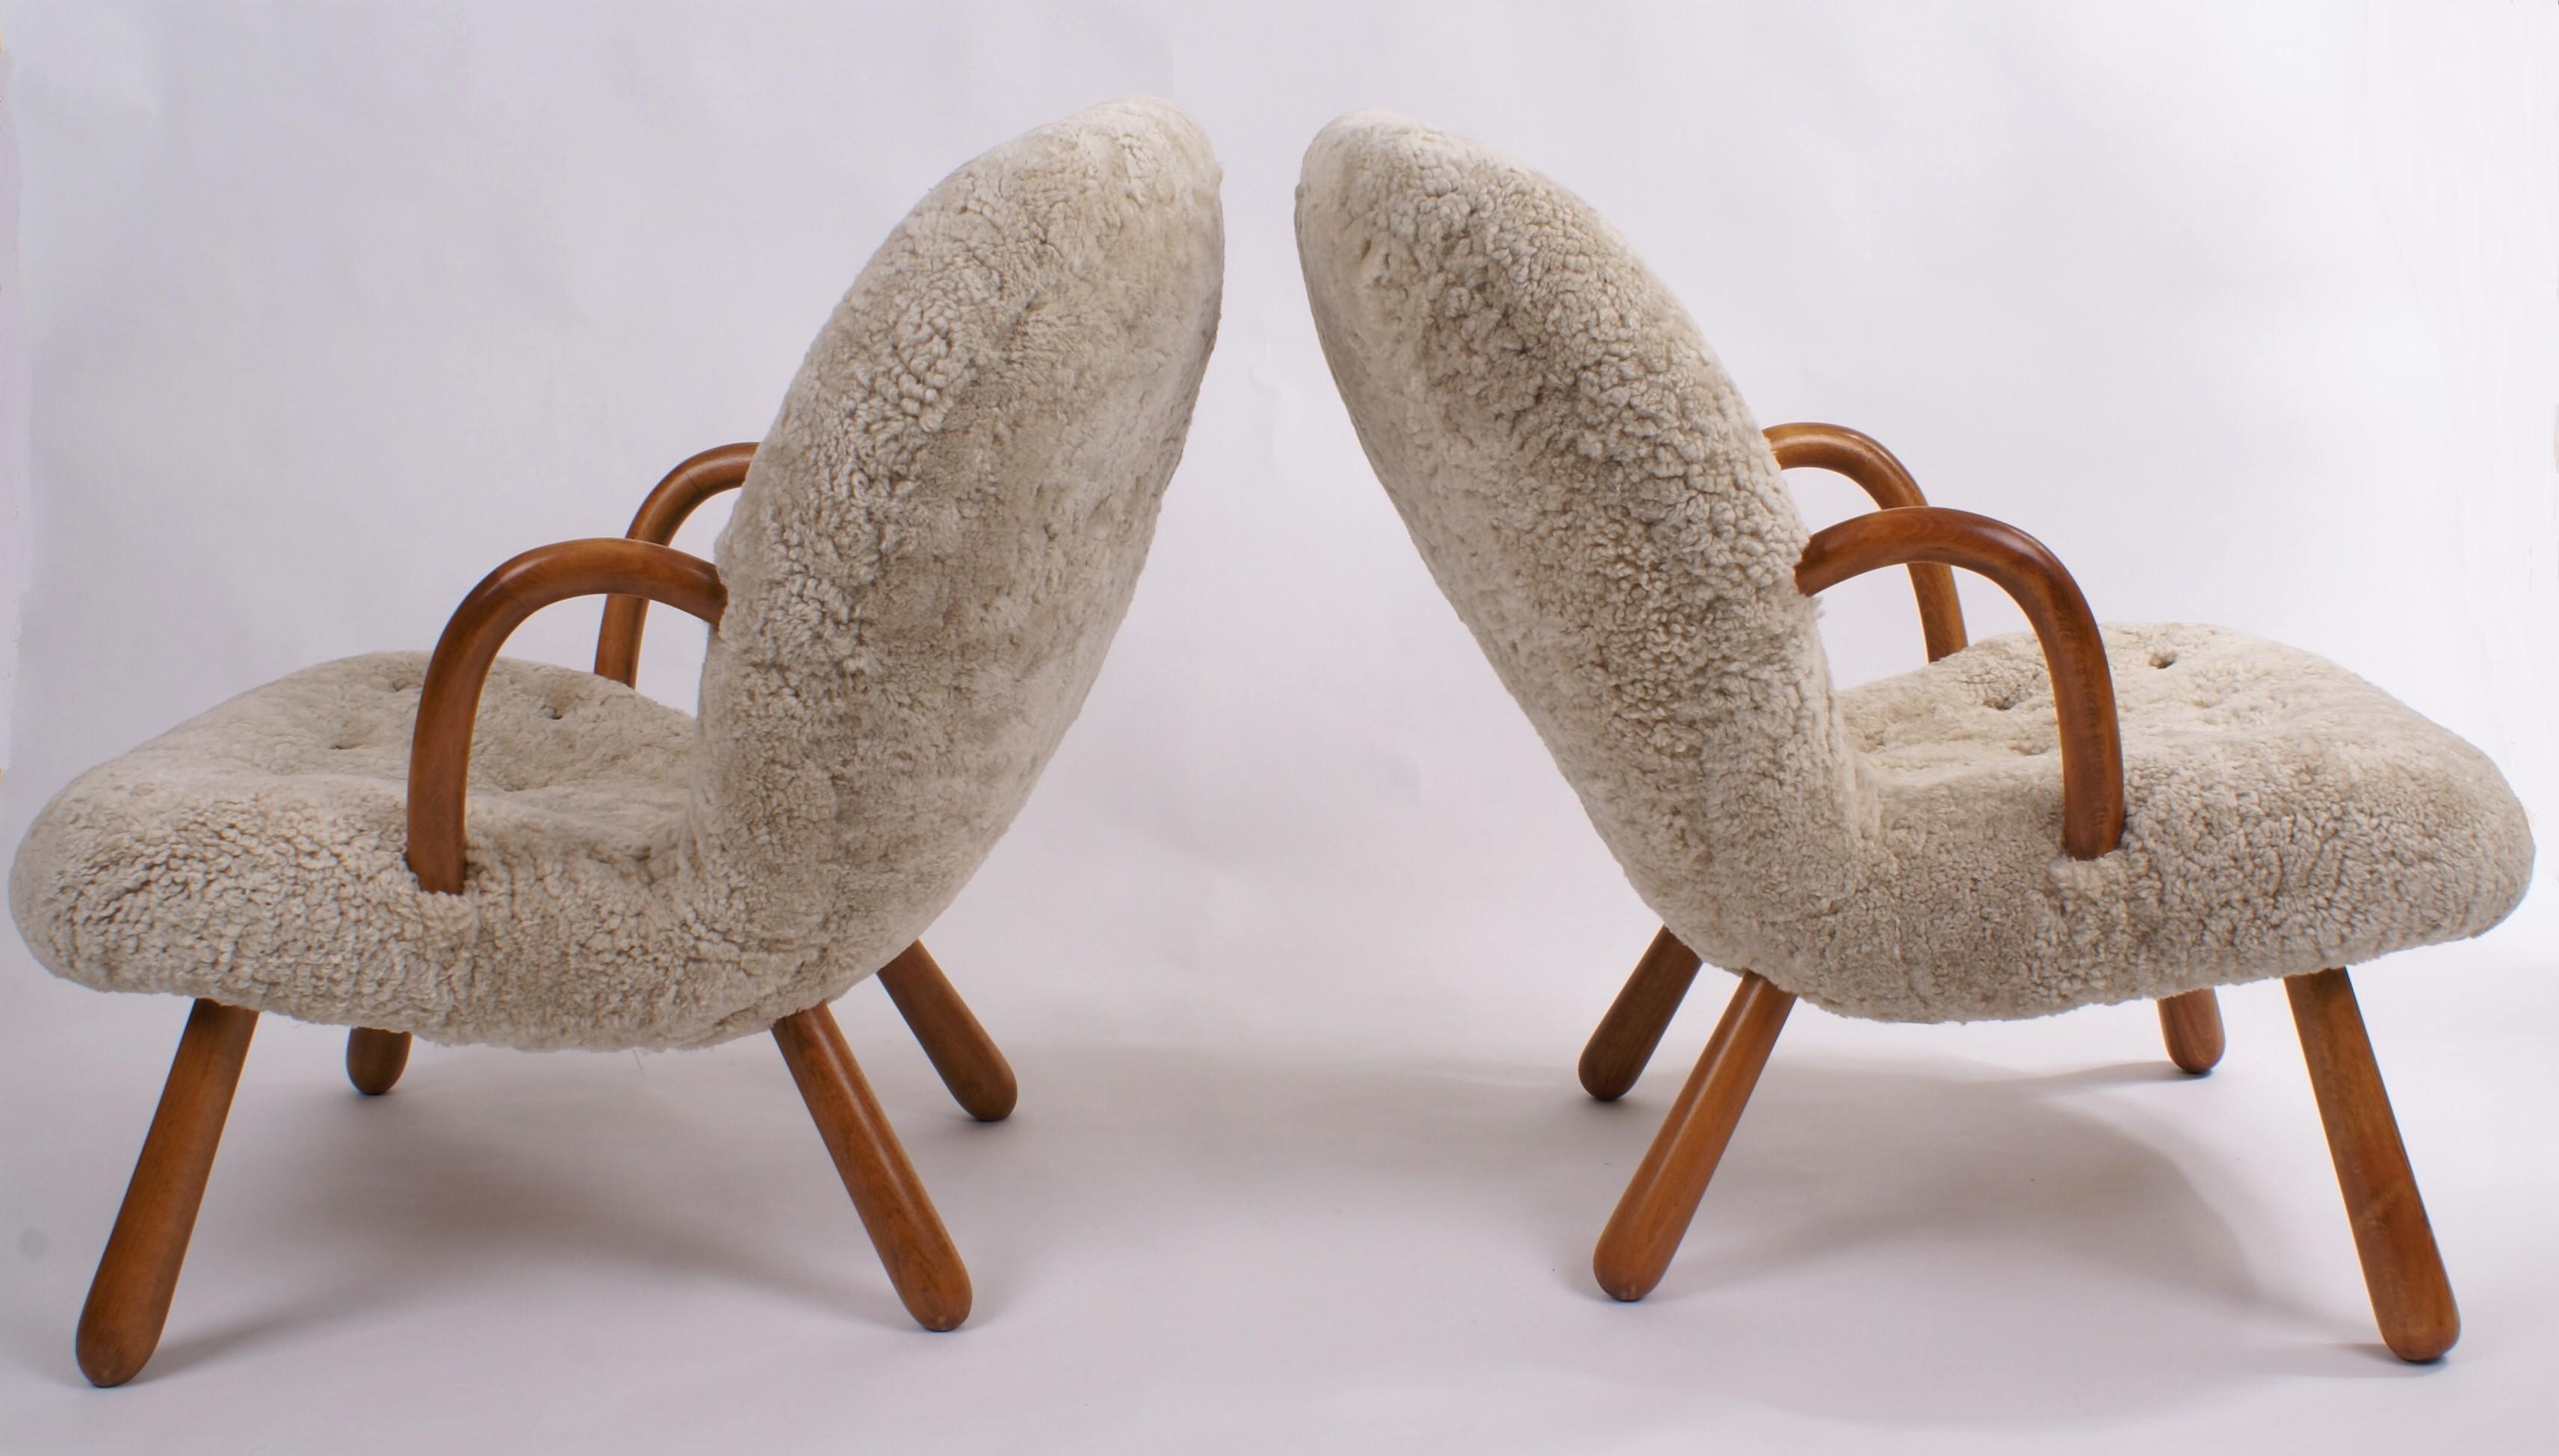 Pair of Philip Arctander 'clam' easy chairs in newly reupholstered beige sheepskin and stained beech legs and armrests. Buttons in leather. Designed, 1944.

The chairs are newly refinished and reupholstered in sheepskin.

Price is for the pair.